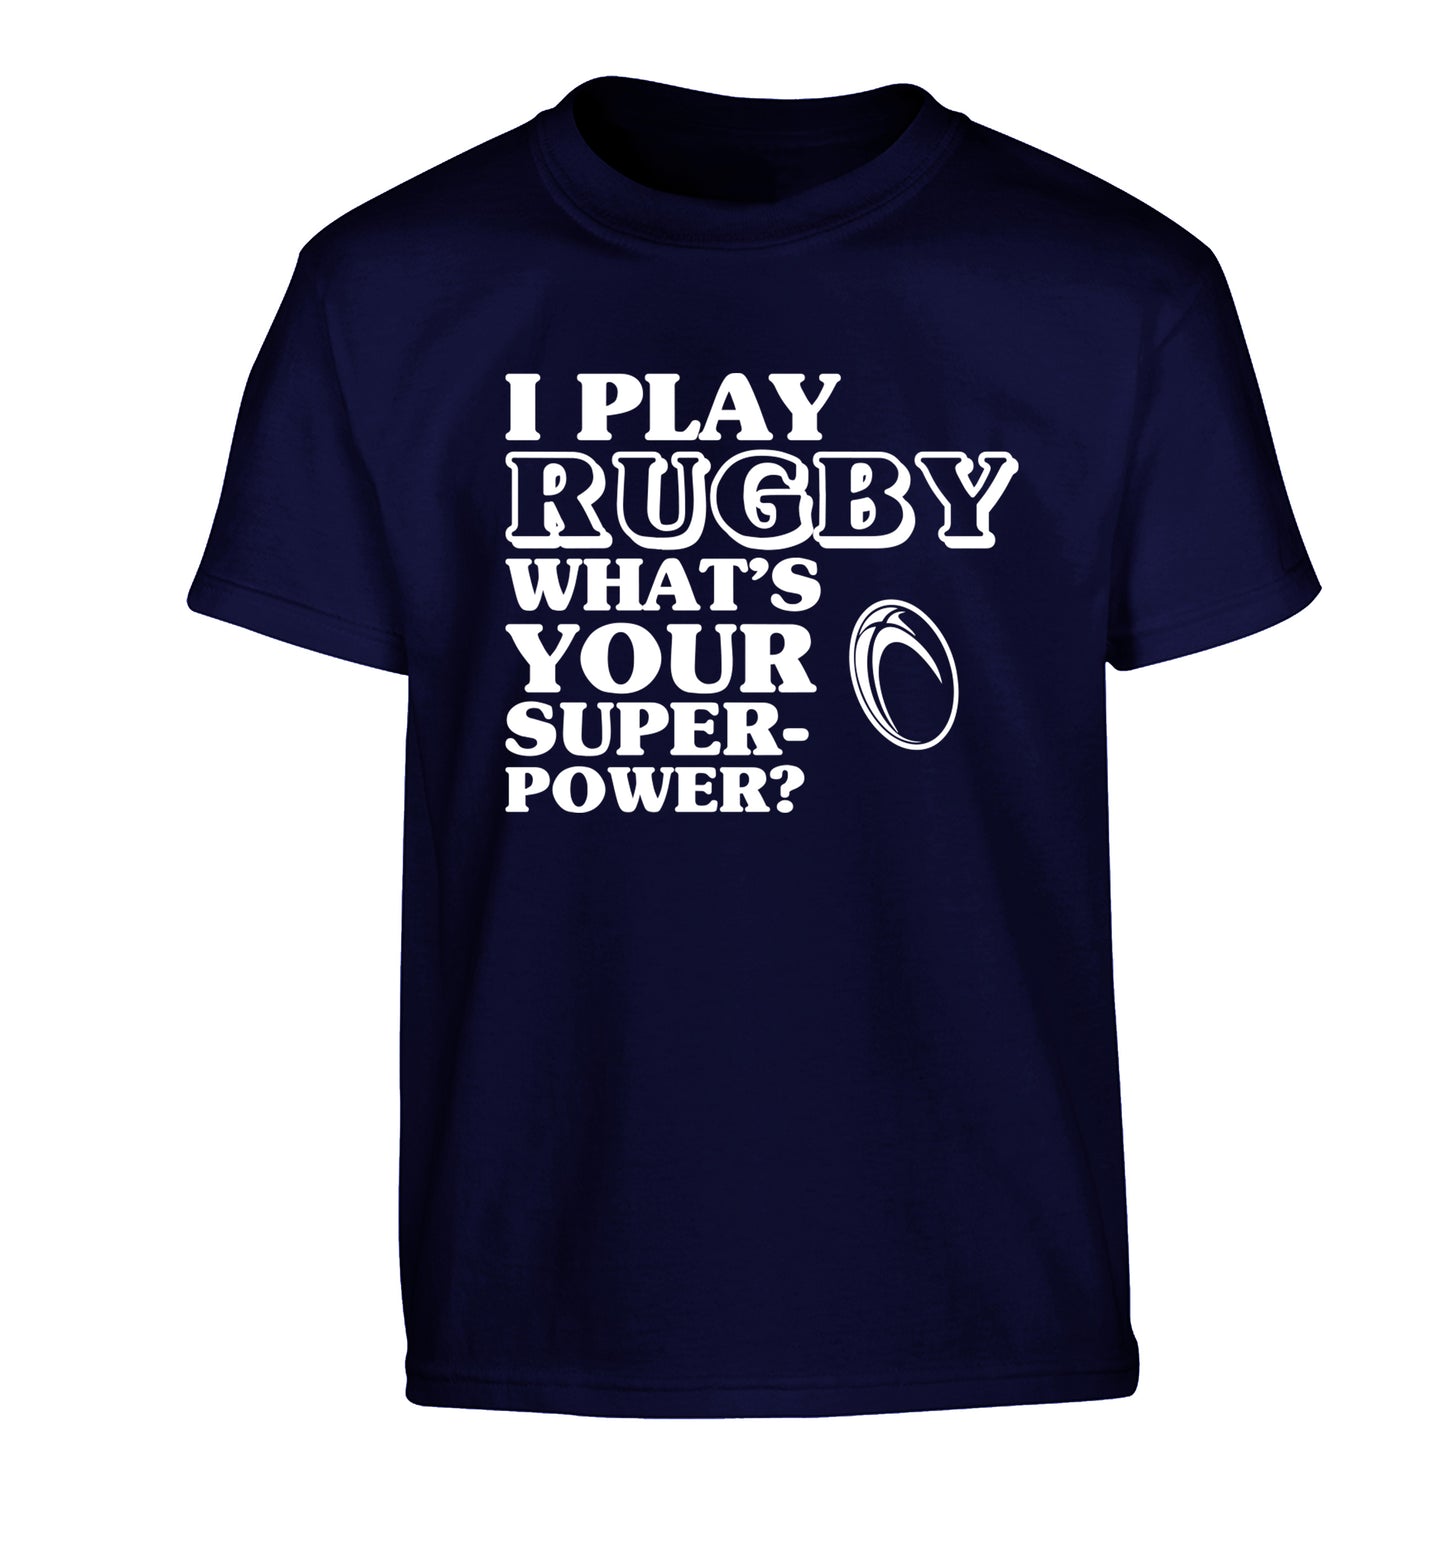 I play rugby what's your superpower? Children's navy Tshirt 12-13 Years